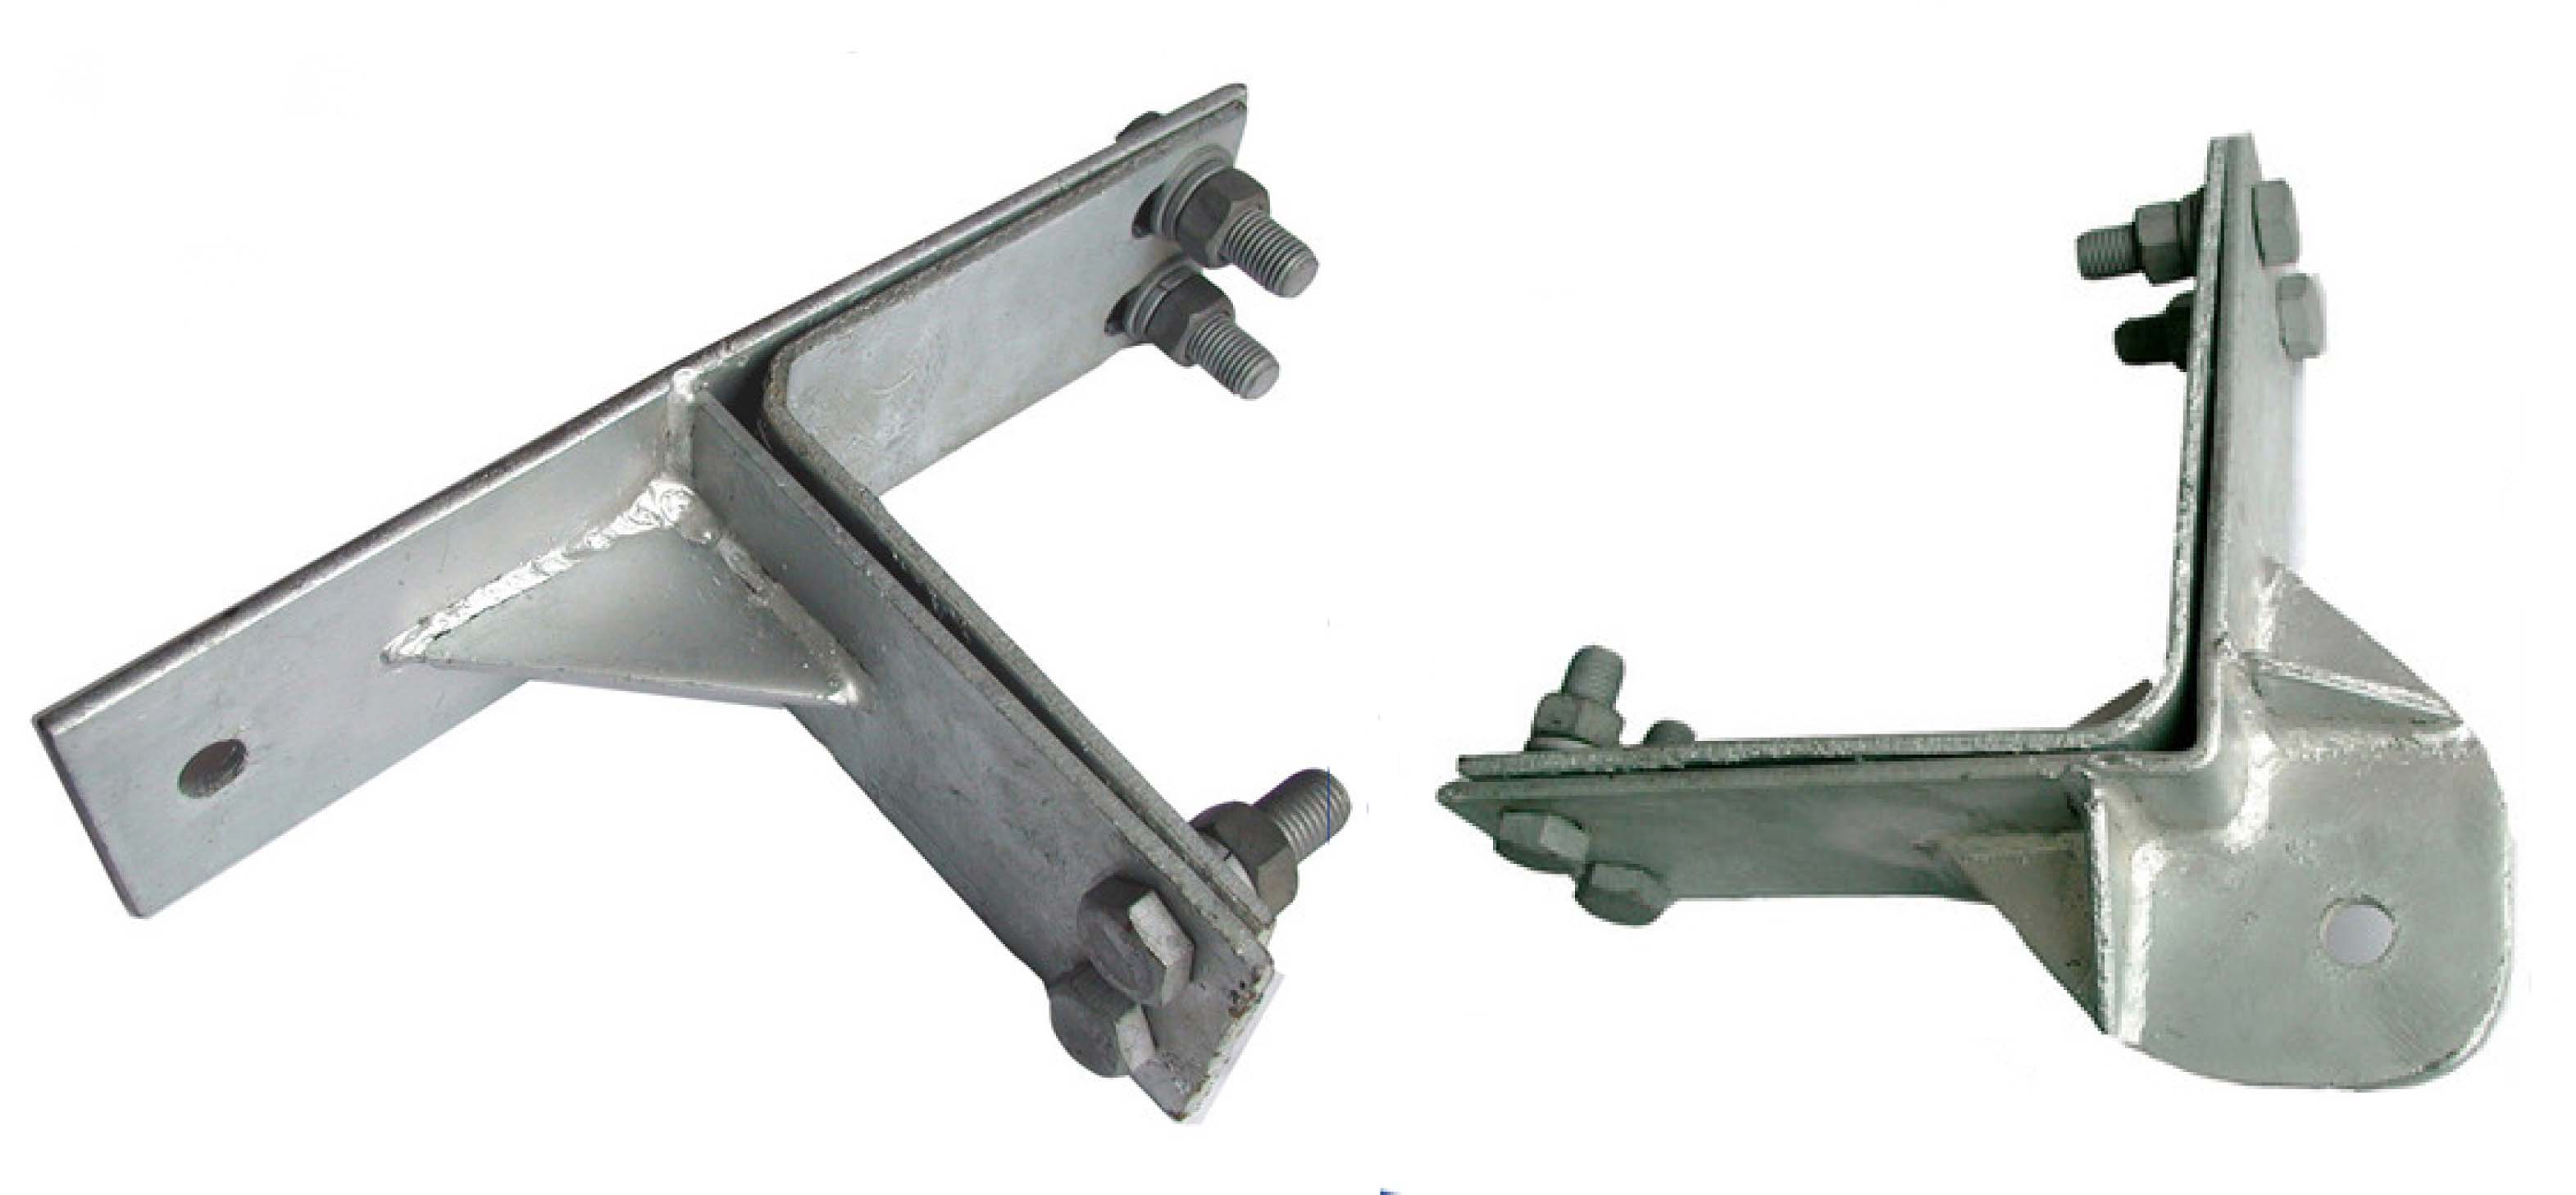 Stainless-Steel-Immobility-Clamp-Used-for-Installation